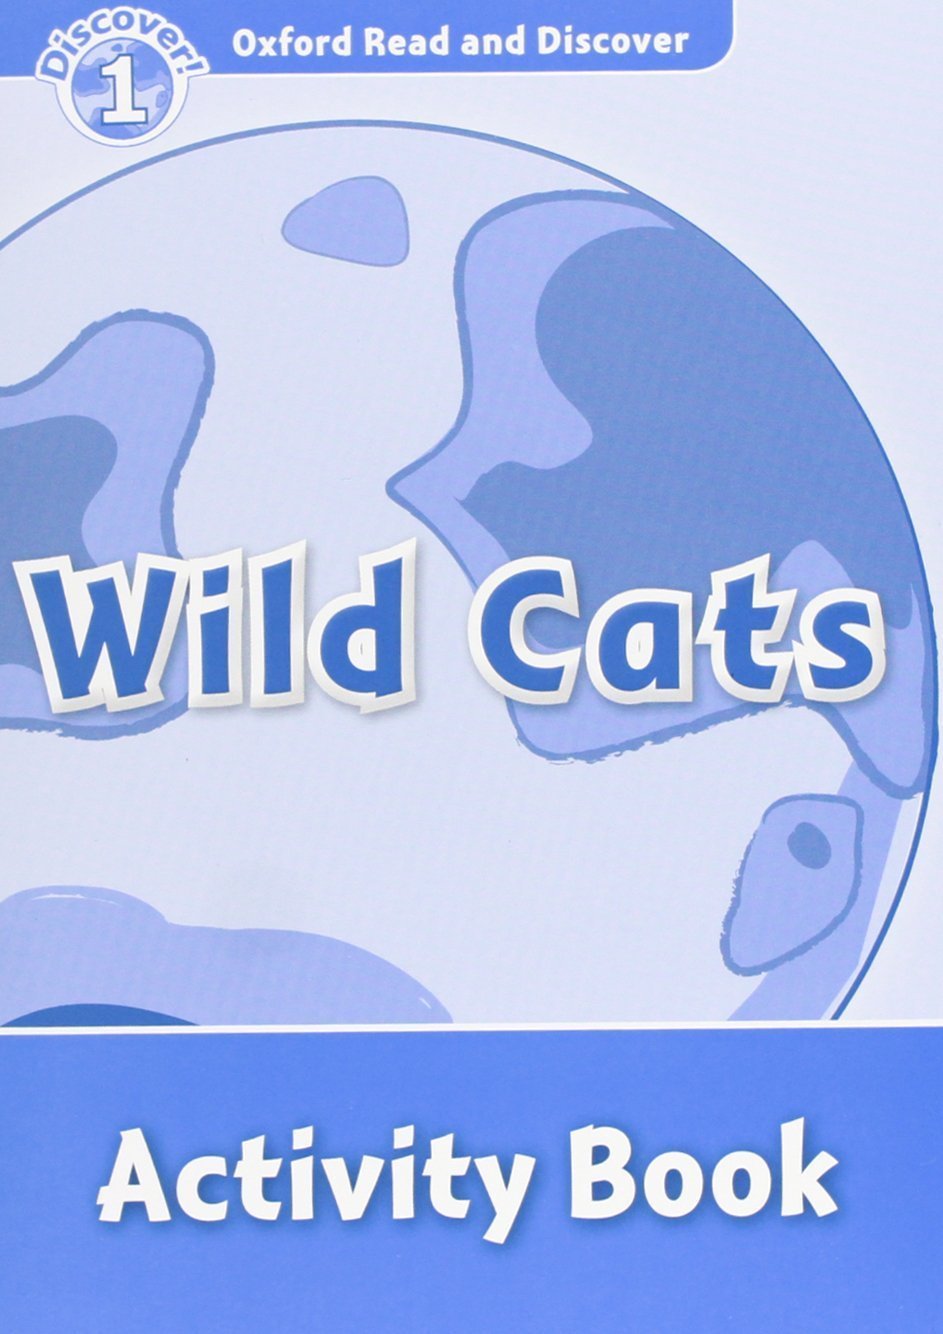 WILD CATS (OXFORD READ AND DISCOVER, LEVEL 1) Activity Book 